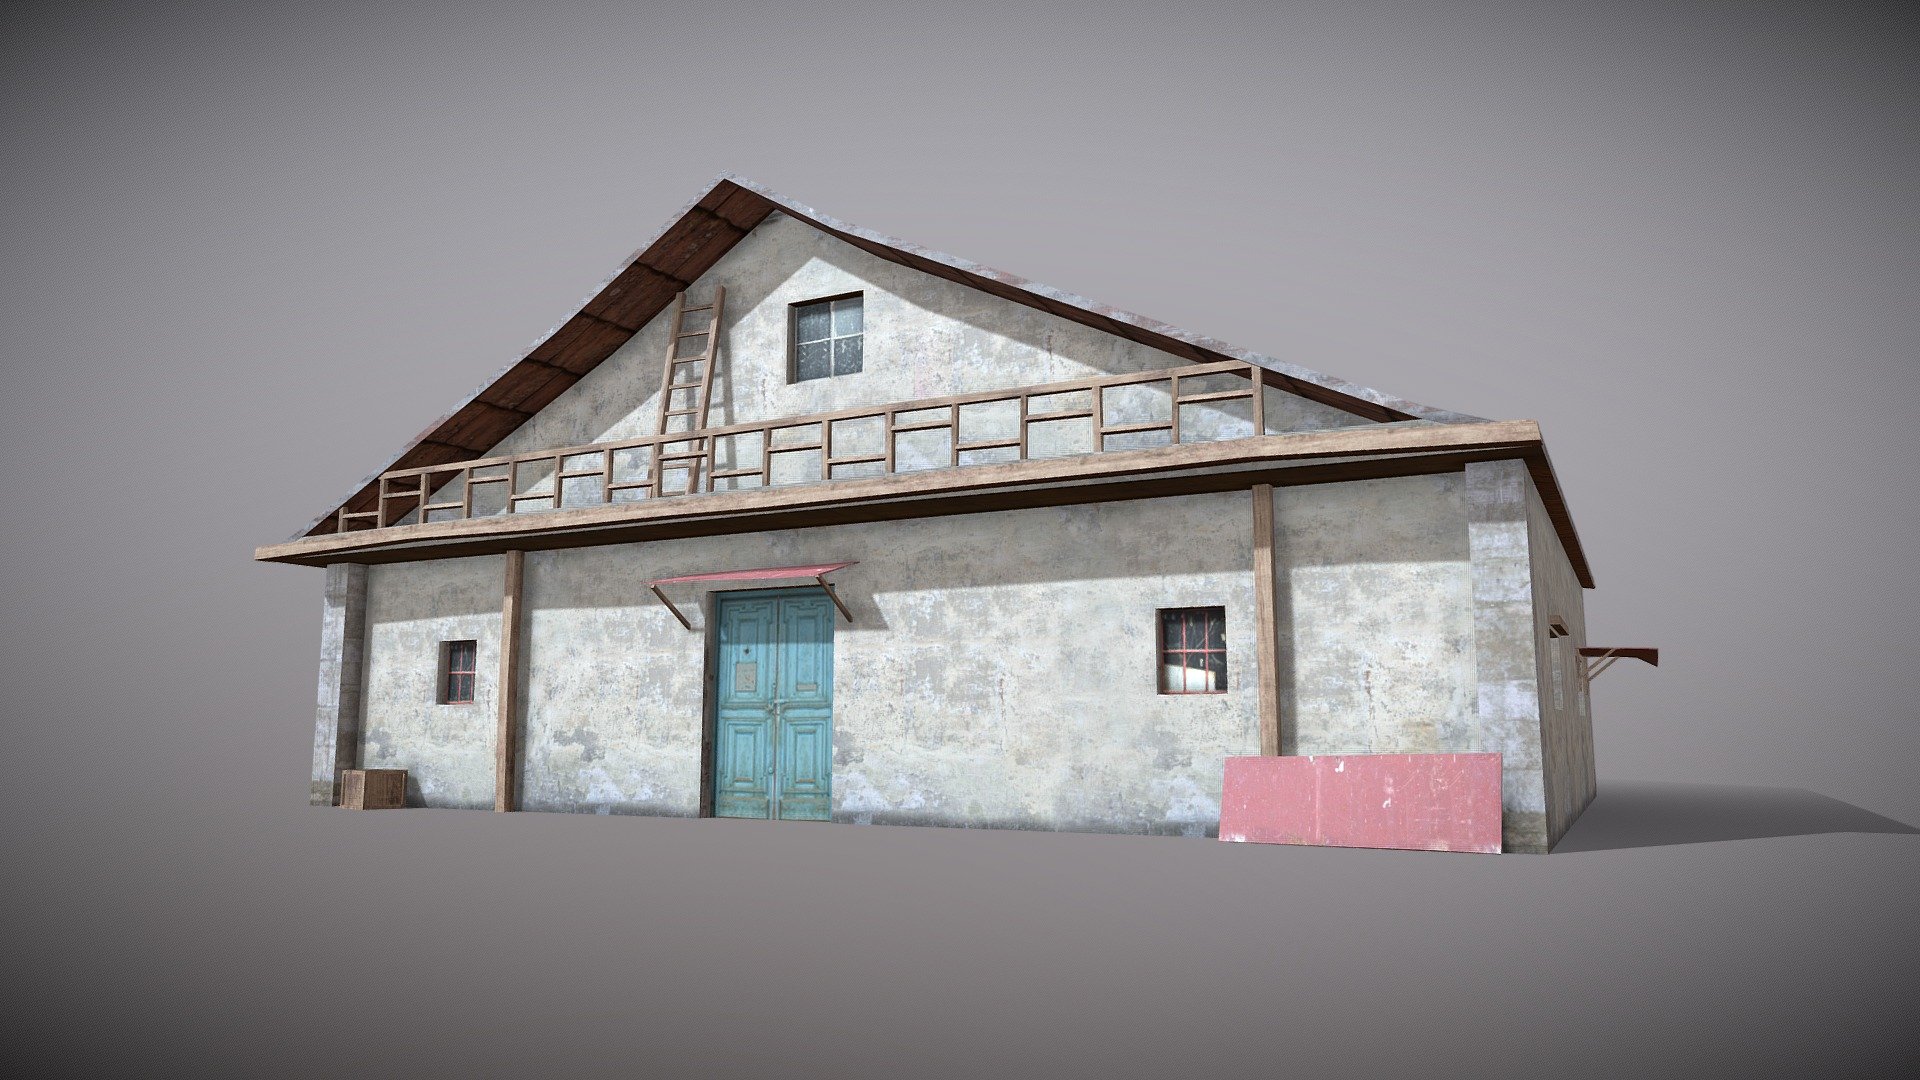 Game Ready 3D Old House /slum Native file format 3Ds max 2022 Other formats Blender 4.0 ,FBX, OBJ, All formats include materials &amp; textures

Polygons- 804   Vertices-962

Materials &amp; textures. 1 Diffuse Map 2048x2048 - Slum X8 - Buy Royalty Free 3D model by 3DRK (@3DRK98) 3d model